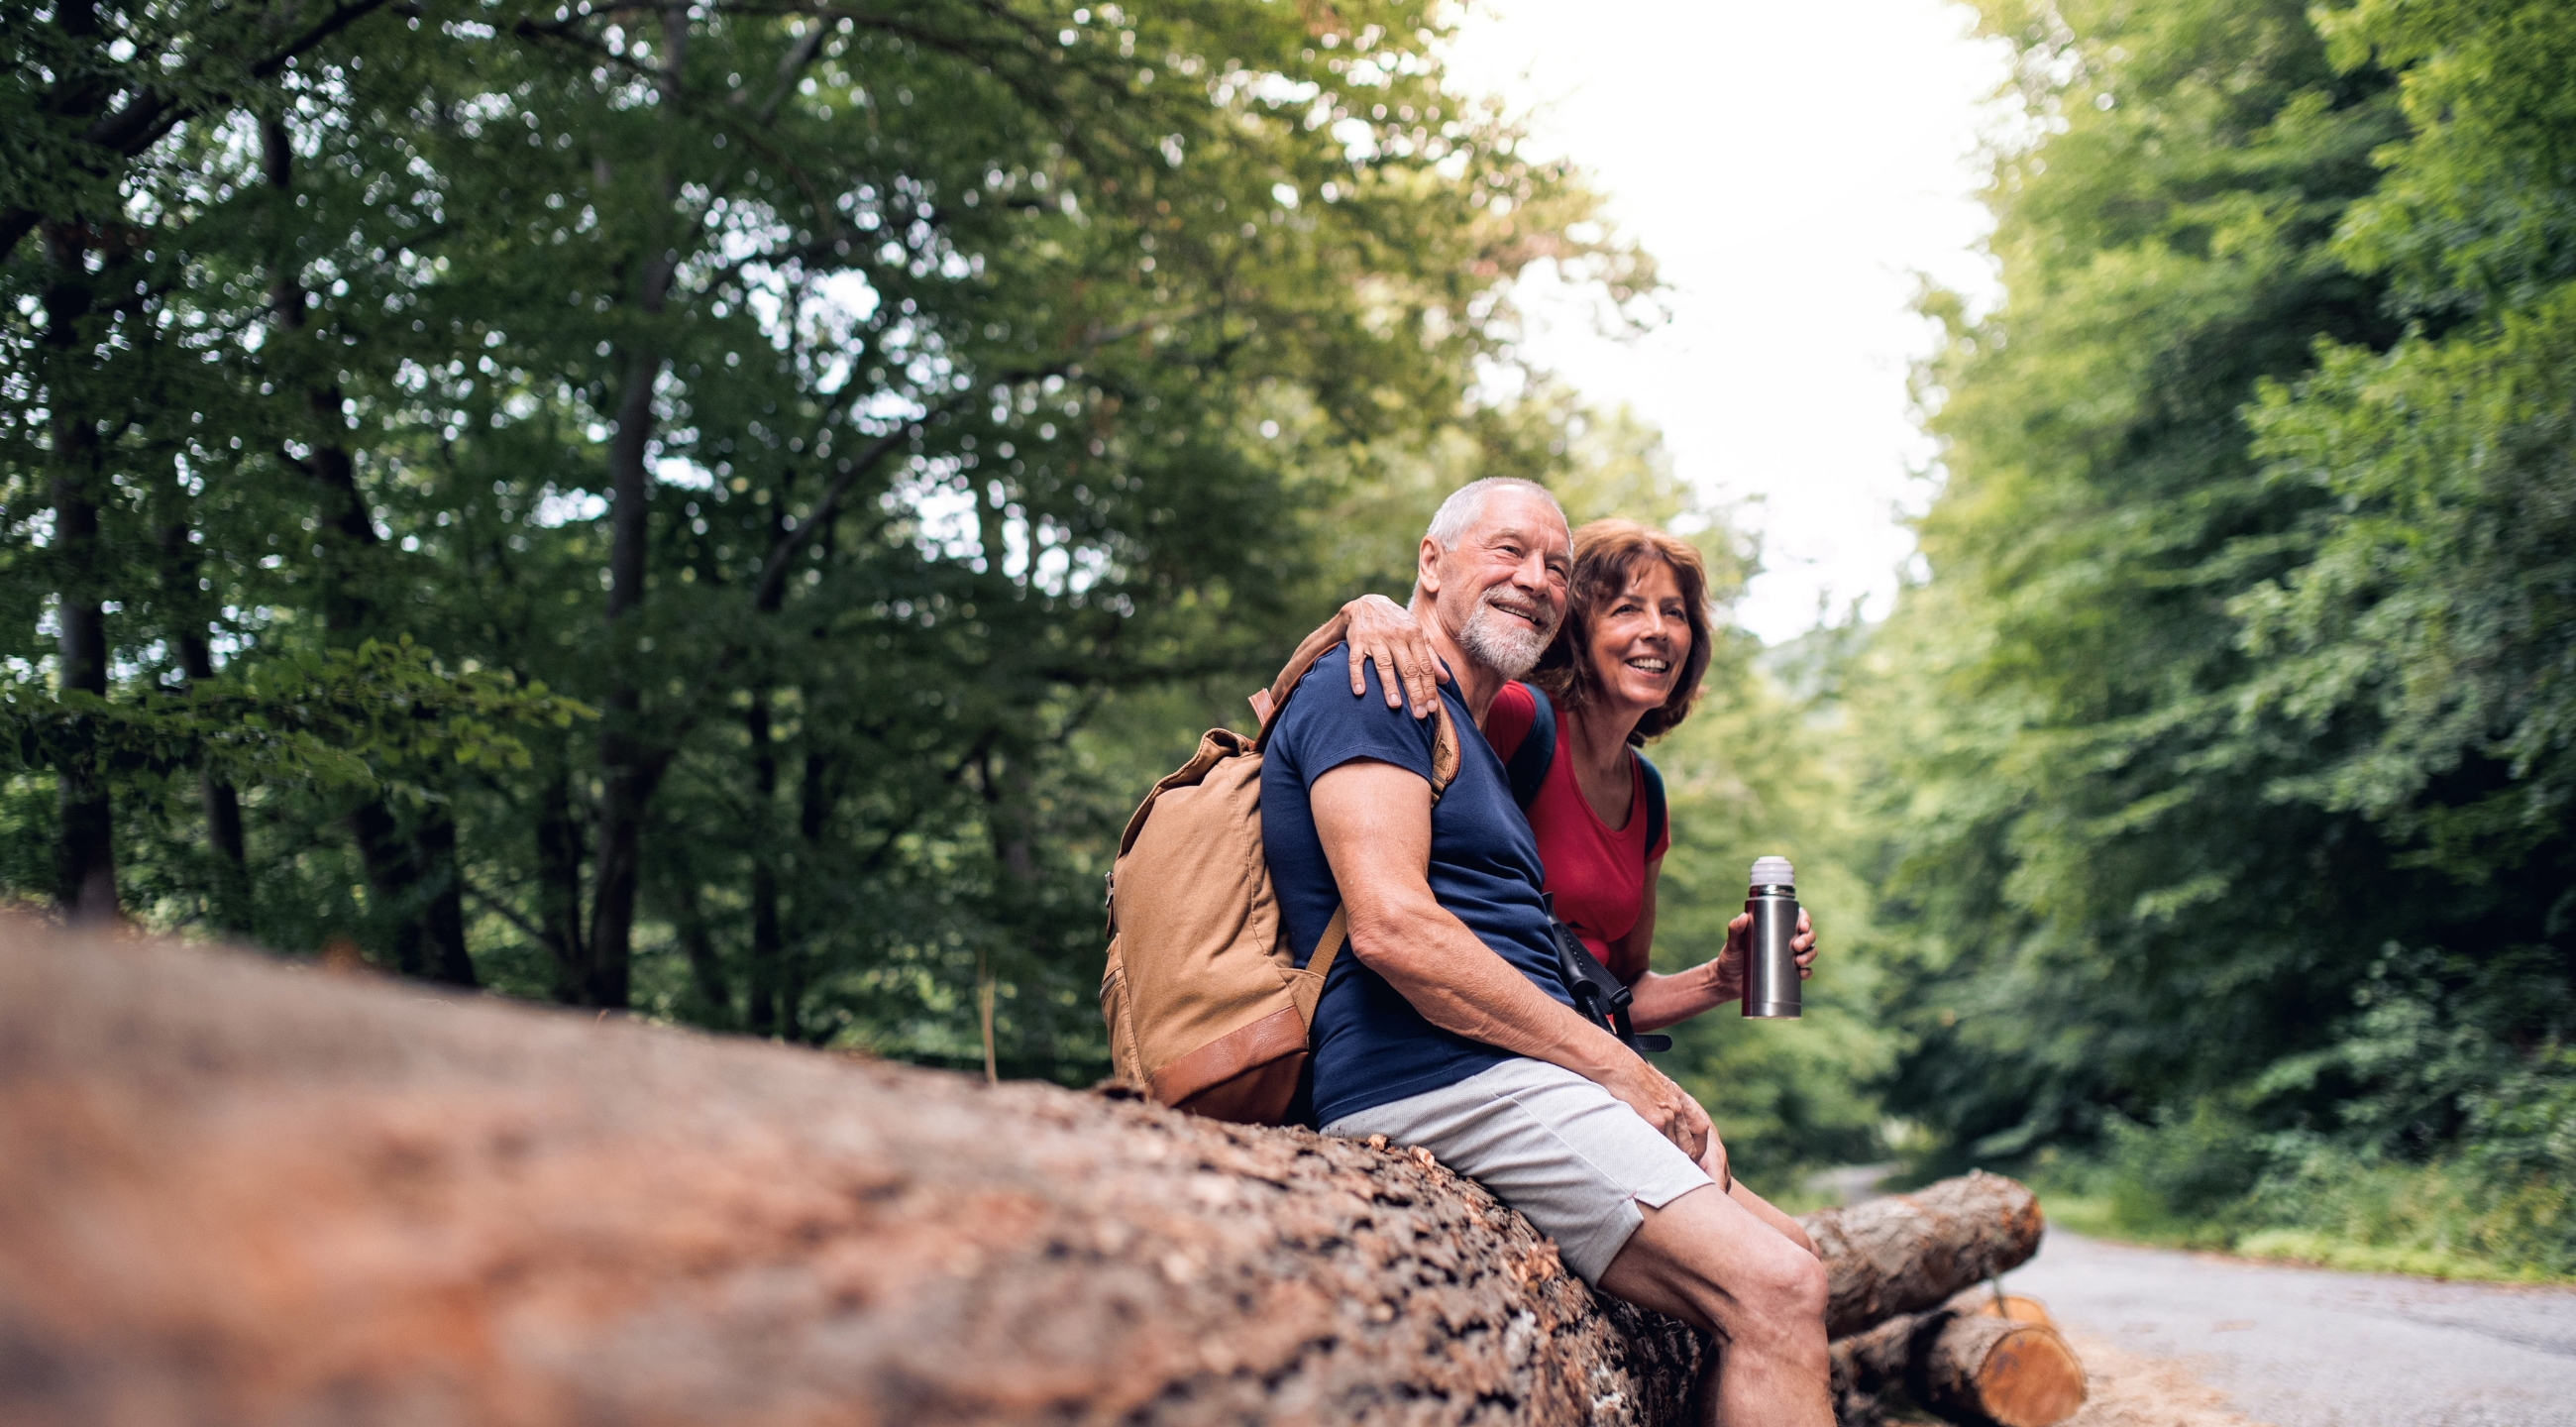 An older aged man and woman sitting arm and arm outdoors on a fallen tree.